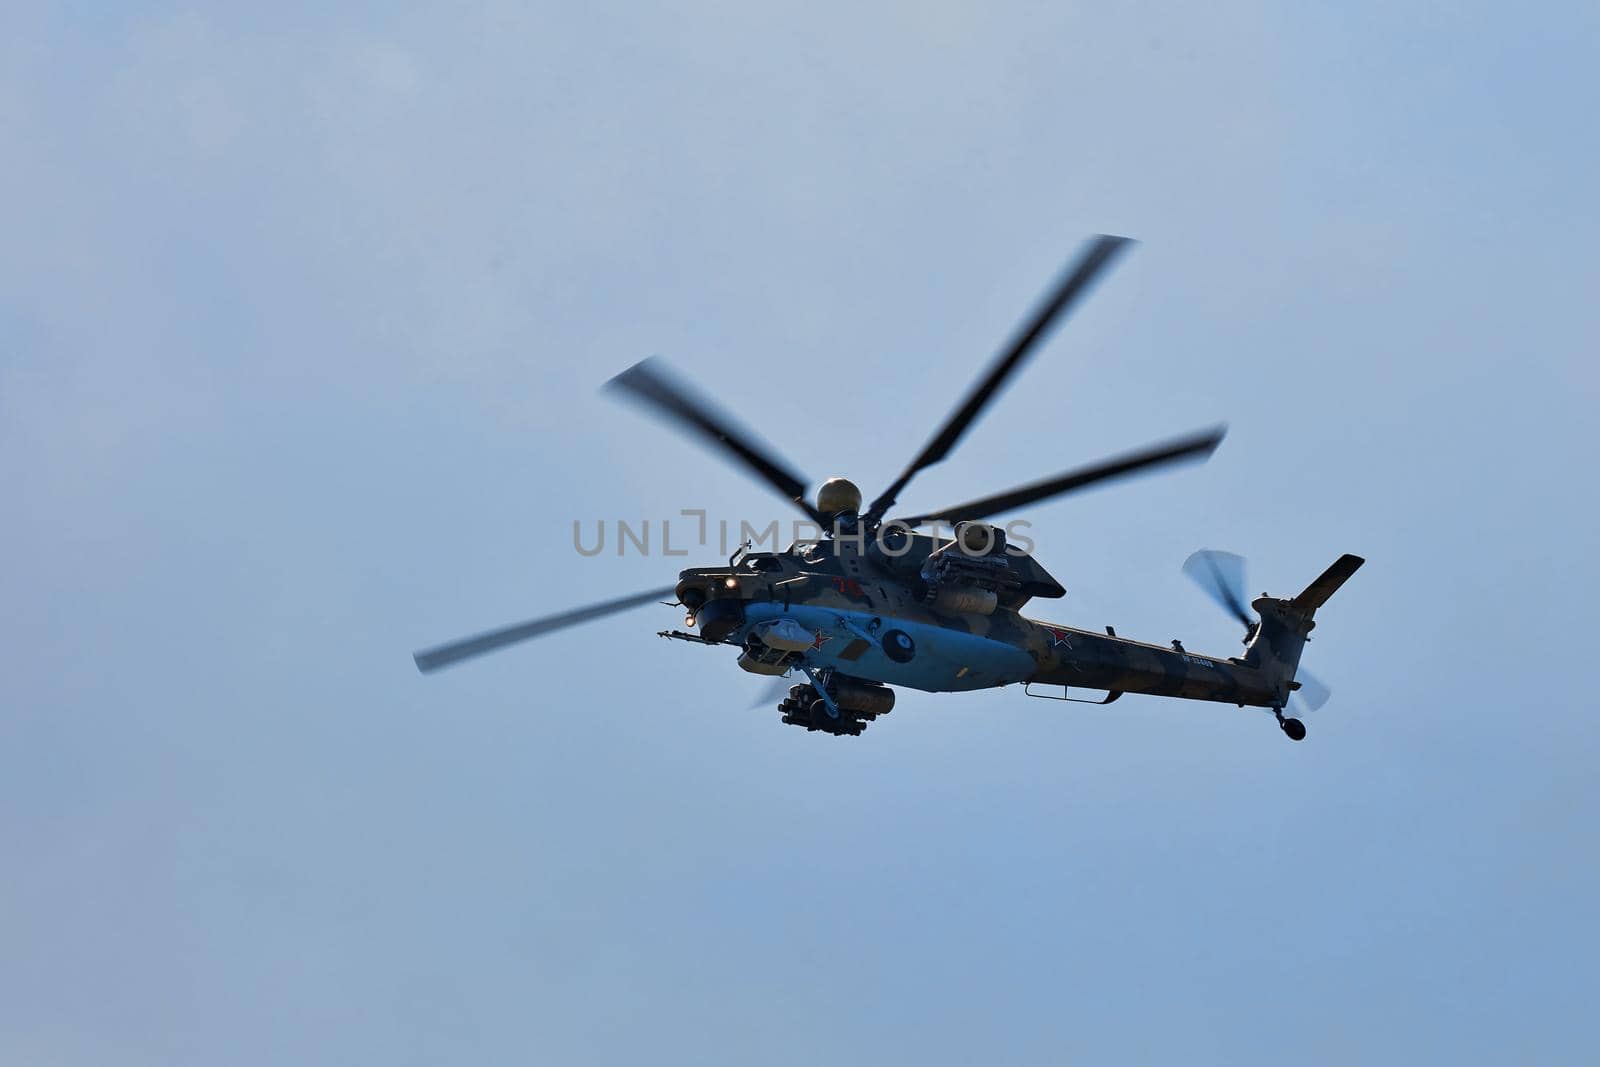 Mil Mi-28 Mi-28NM, codification of NATO: Havoc. Russian all-weather, day-night, military tandem, two-seat anti-armor attack helicopter on MAKS 2019 airshow. ZHUKOVSKY, RUSSIA, AUGUST 27, 2019.